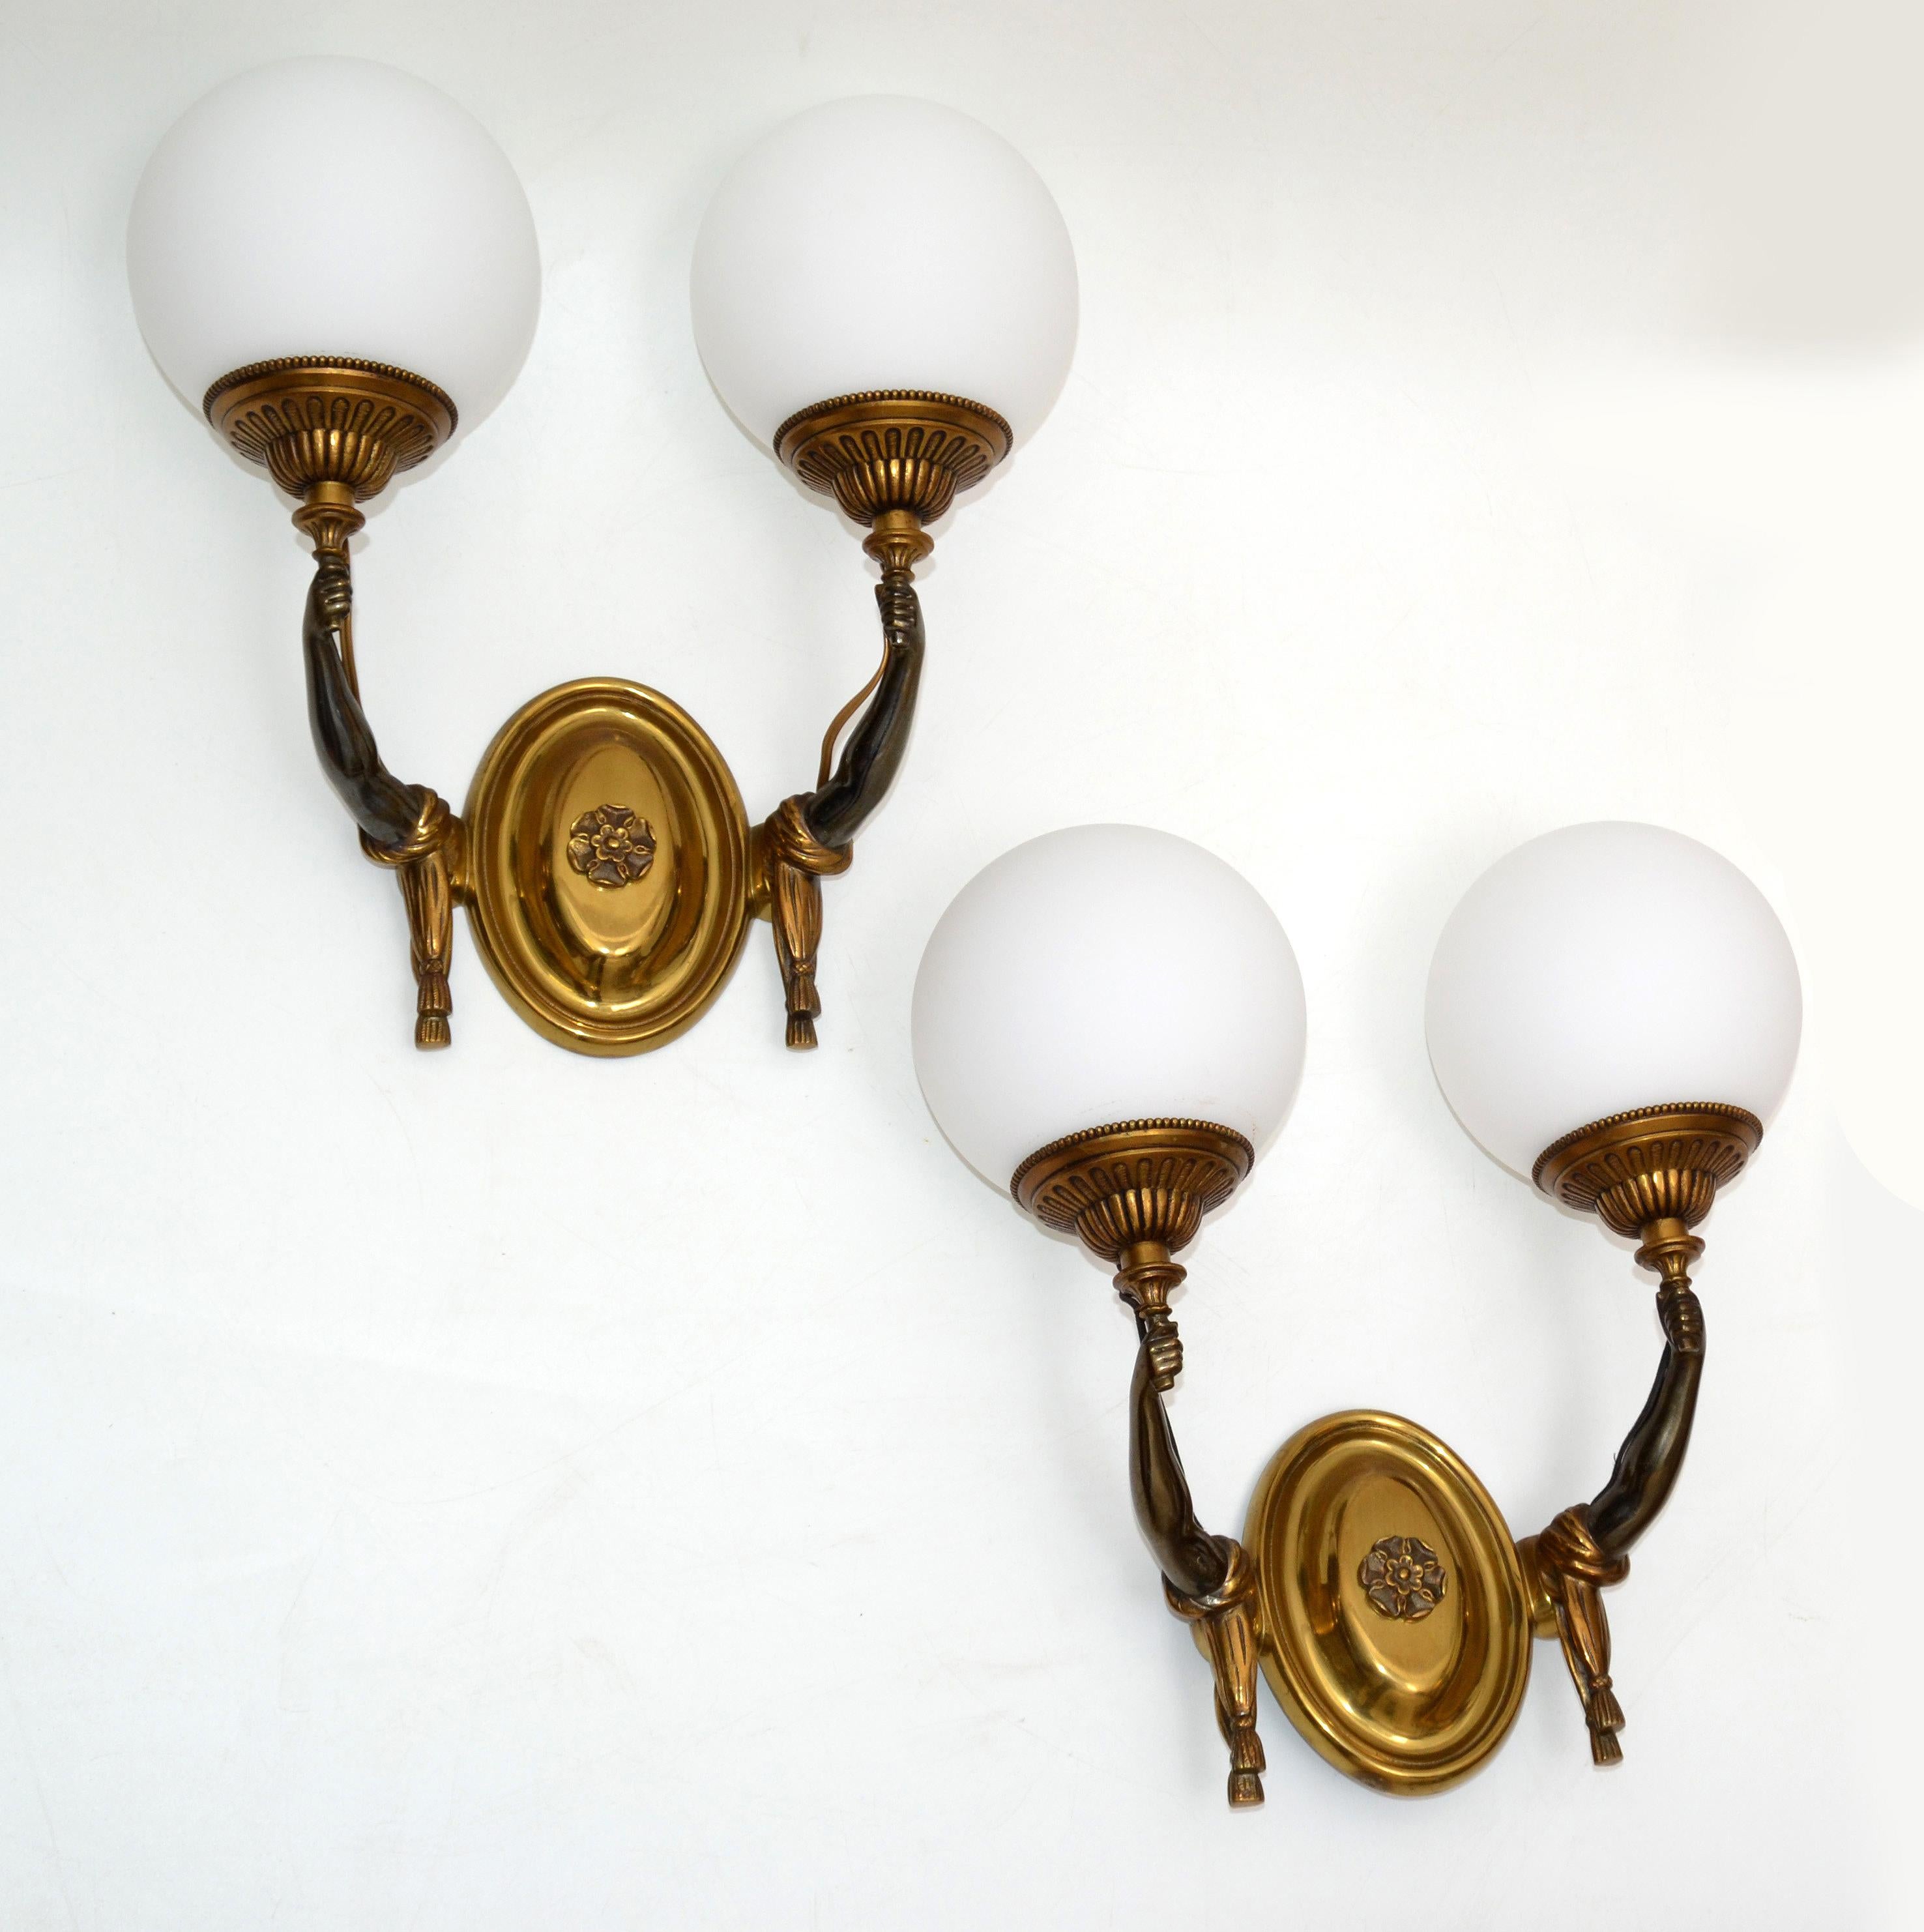 Pair of Charles et Fils bronze two arms holding up a round blown opaline glass shade. 
French neoclassical design wall light from the 1950s.
US wired and in working condition.
Measures: 13 inches H with shade, 10 inches H without shade.
Back